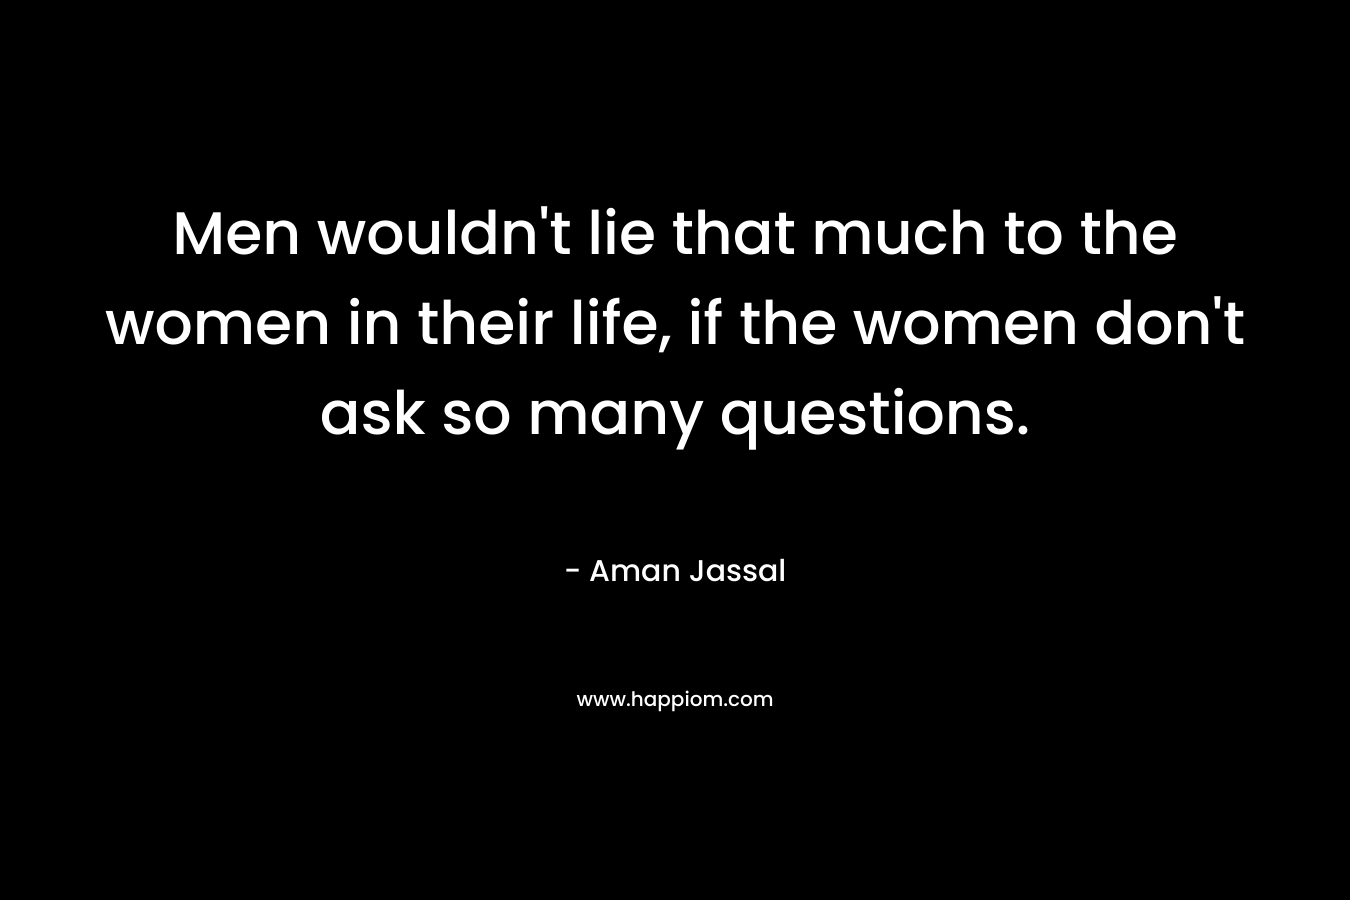 Men wouldn’t lie that much to the women in their life, if the women don’t ask so many questions. – Aman Jassal